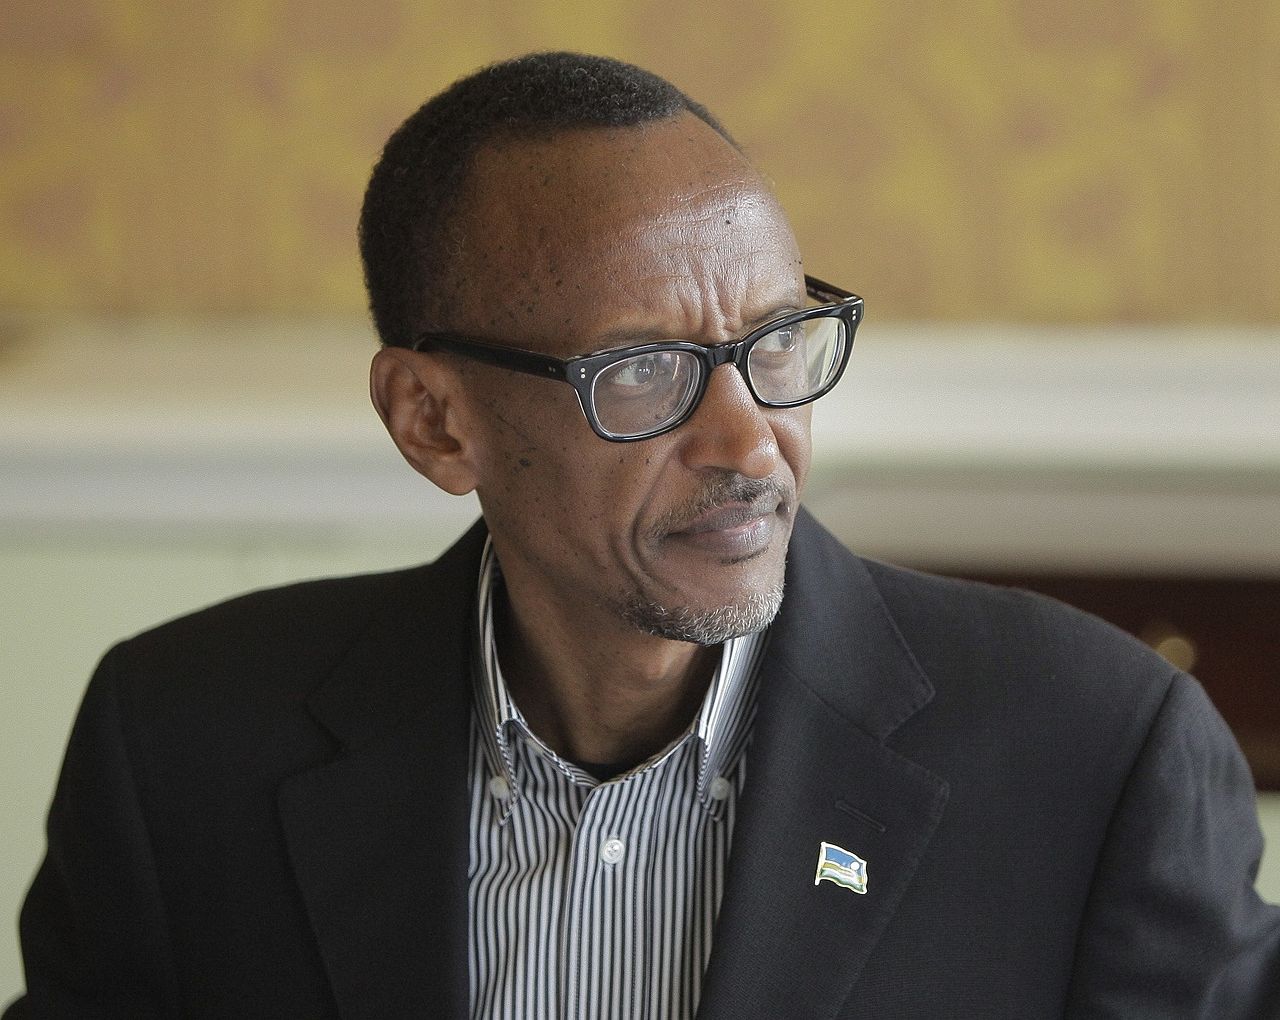 H.E. President of Rwanda, Paul Kagame at the 9th Broadband Commission Meeting, Dublin 22-23 March 2014. / Pan-African